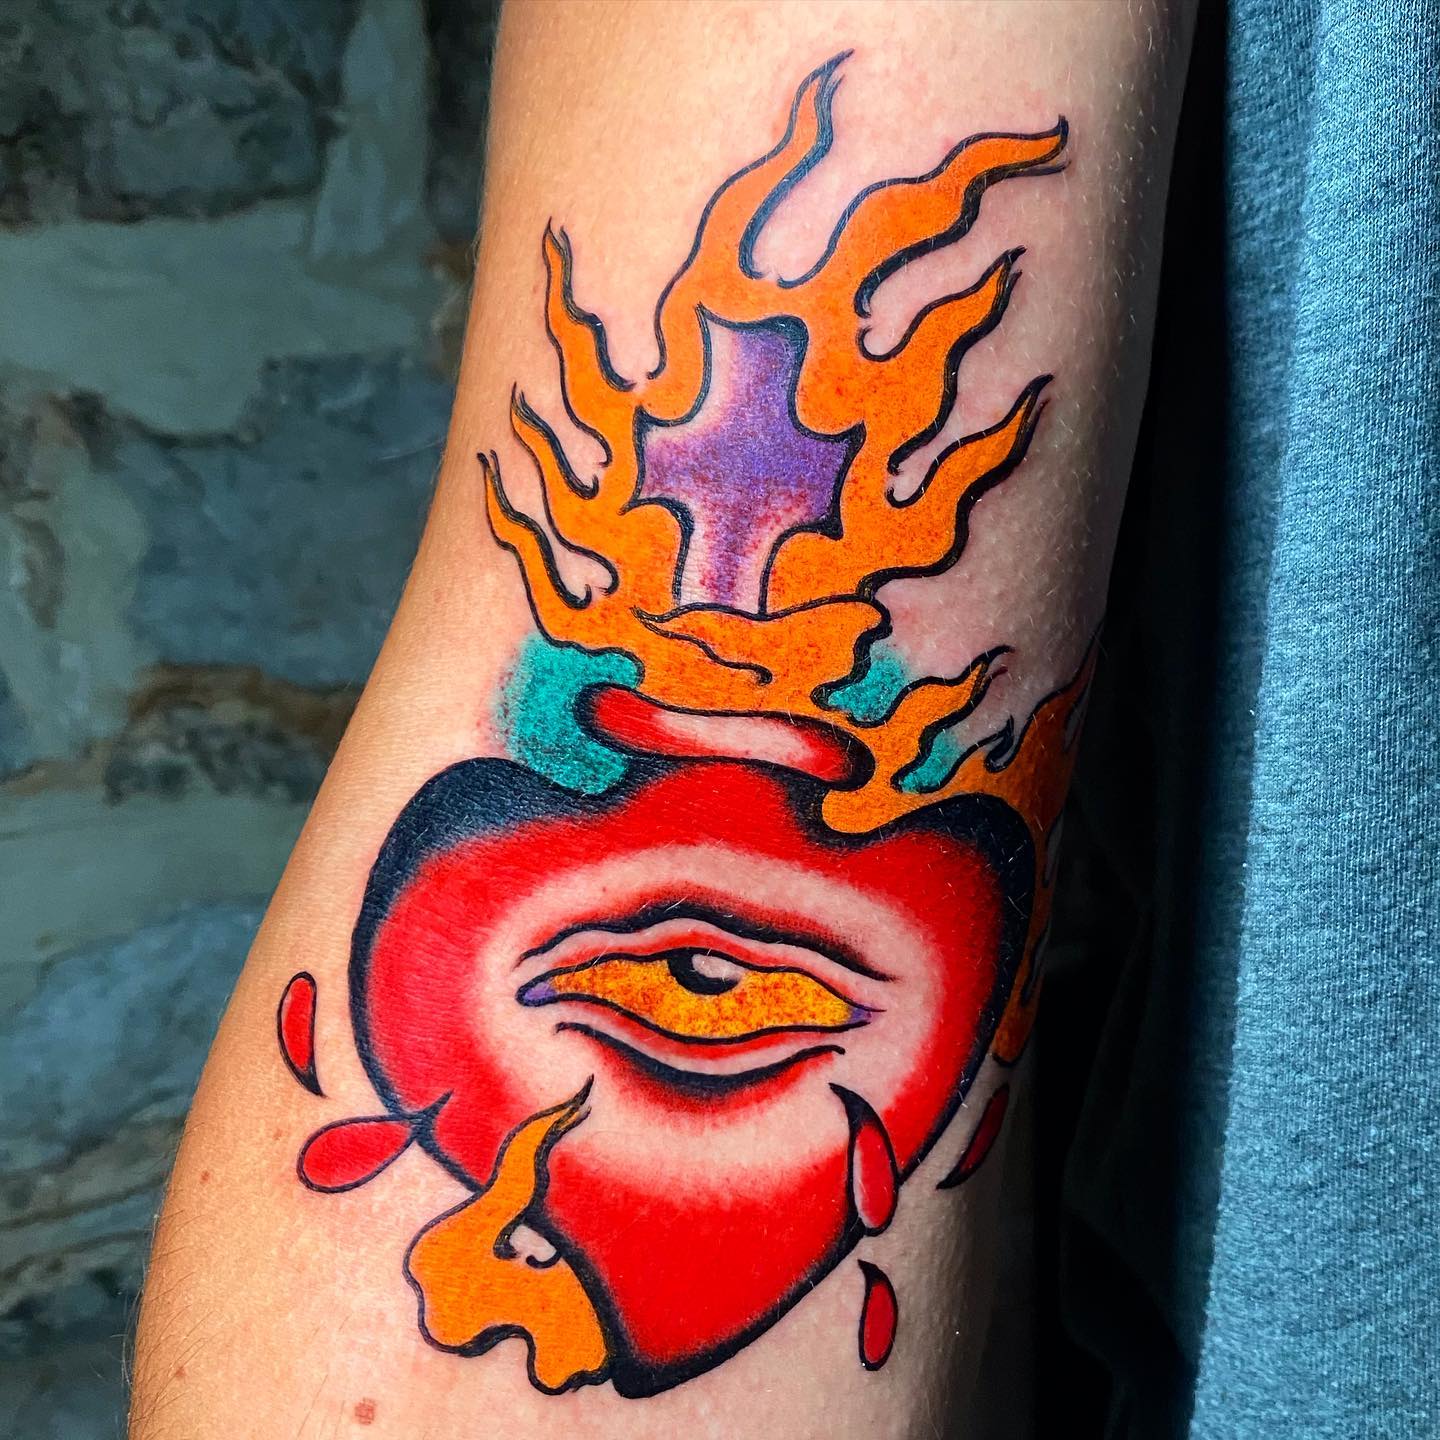 Pop art and colorful tattoos such as this one can work and look so good on both men and women. If you enjoy retro art and you want a tattoo that has its own meaning that is personal to you, try this one out.